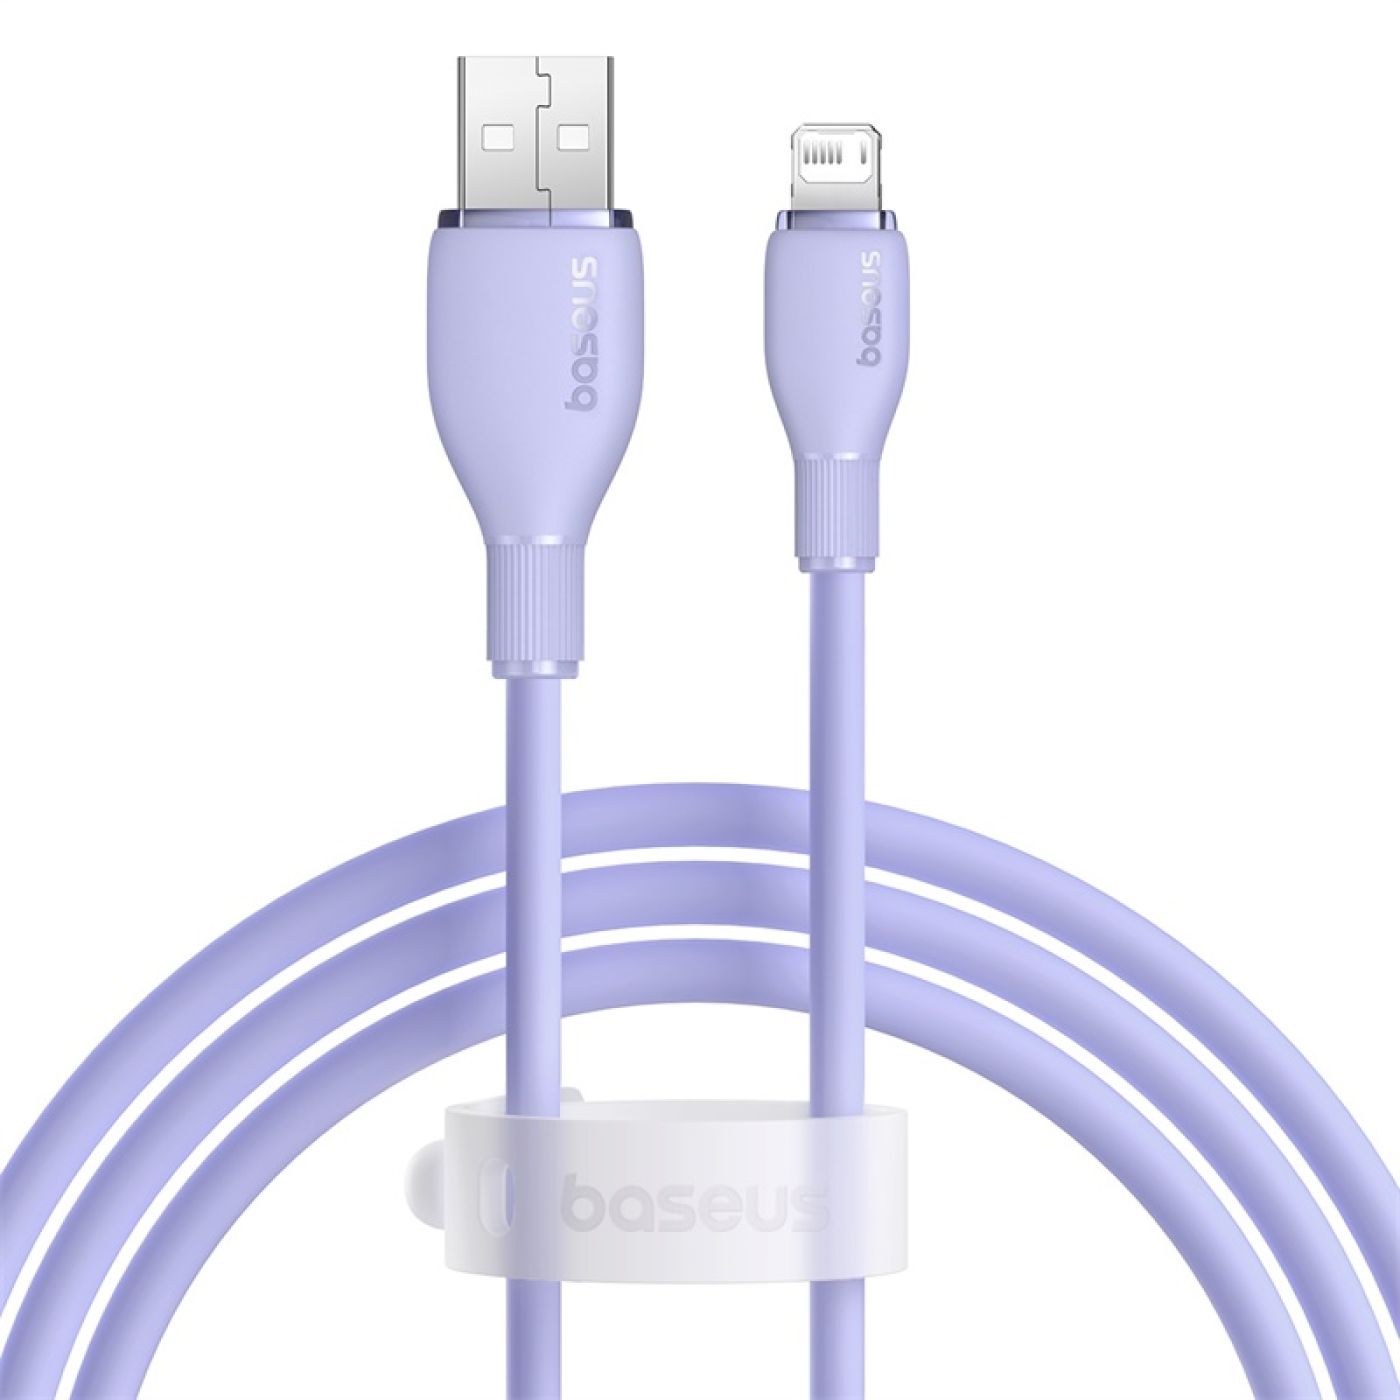 Cáp Sạc Nhanh Baseus Pudding Series Fast Charging Cable USB to iP 2.4A